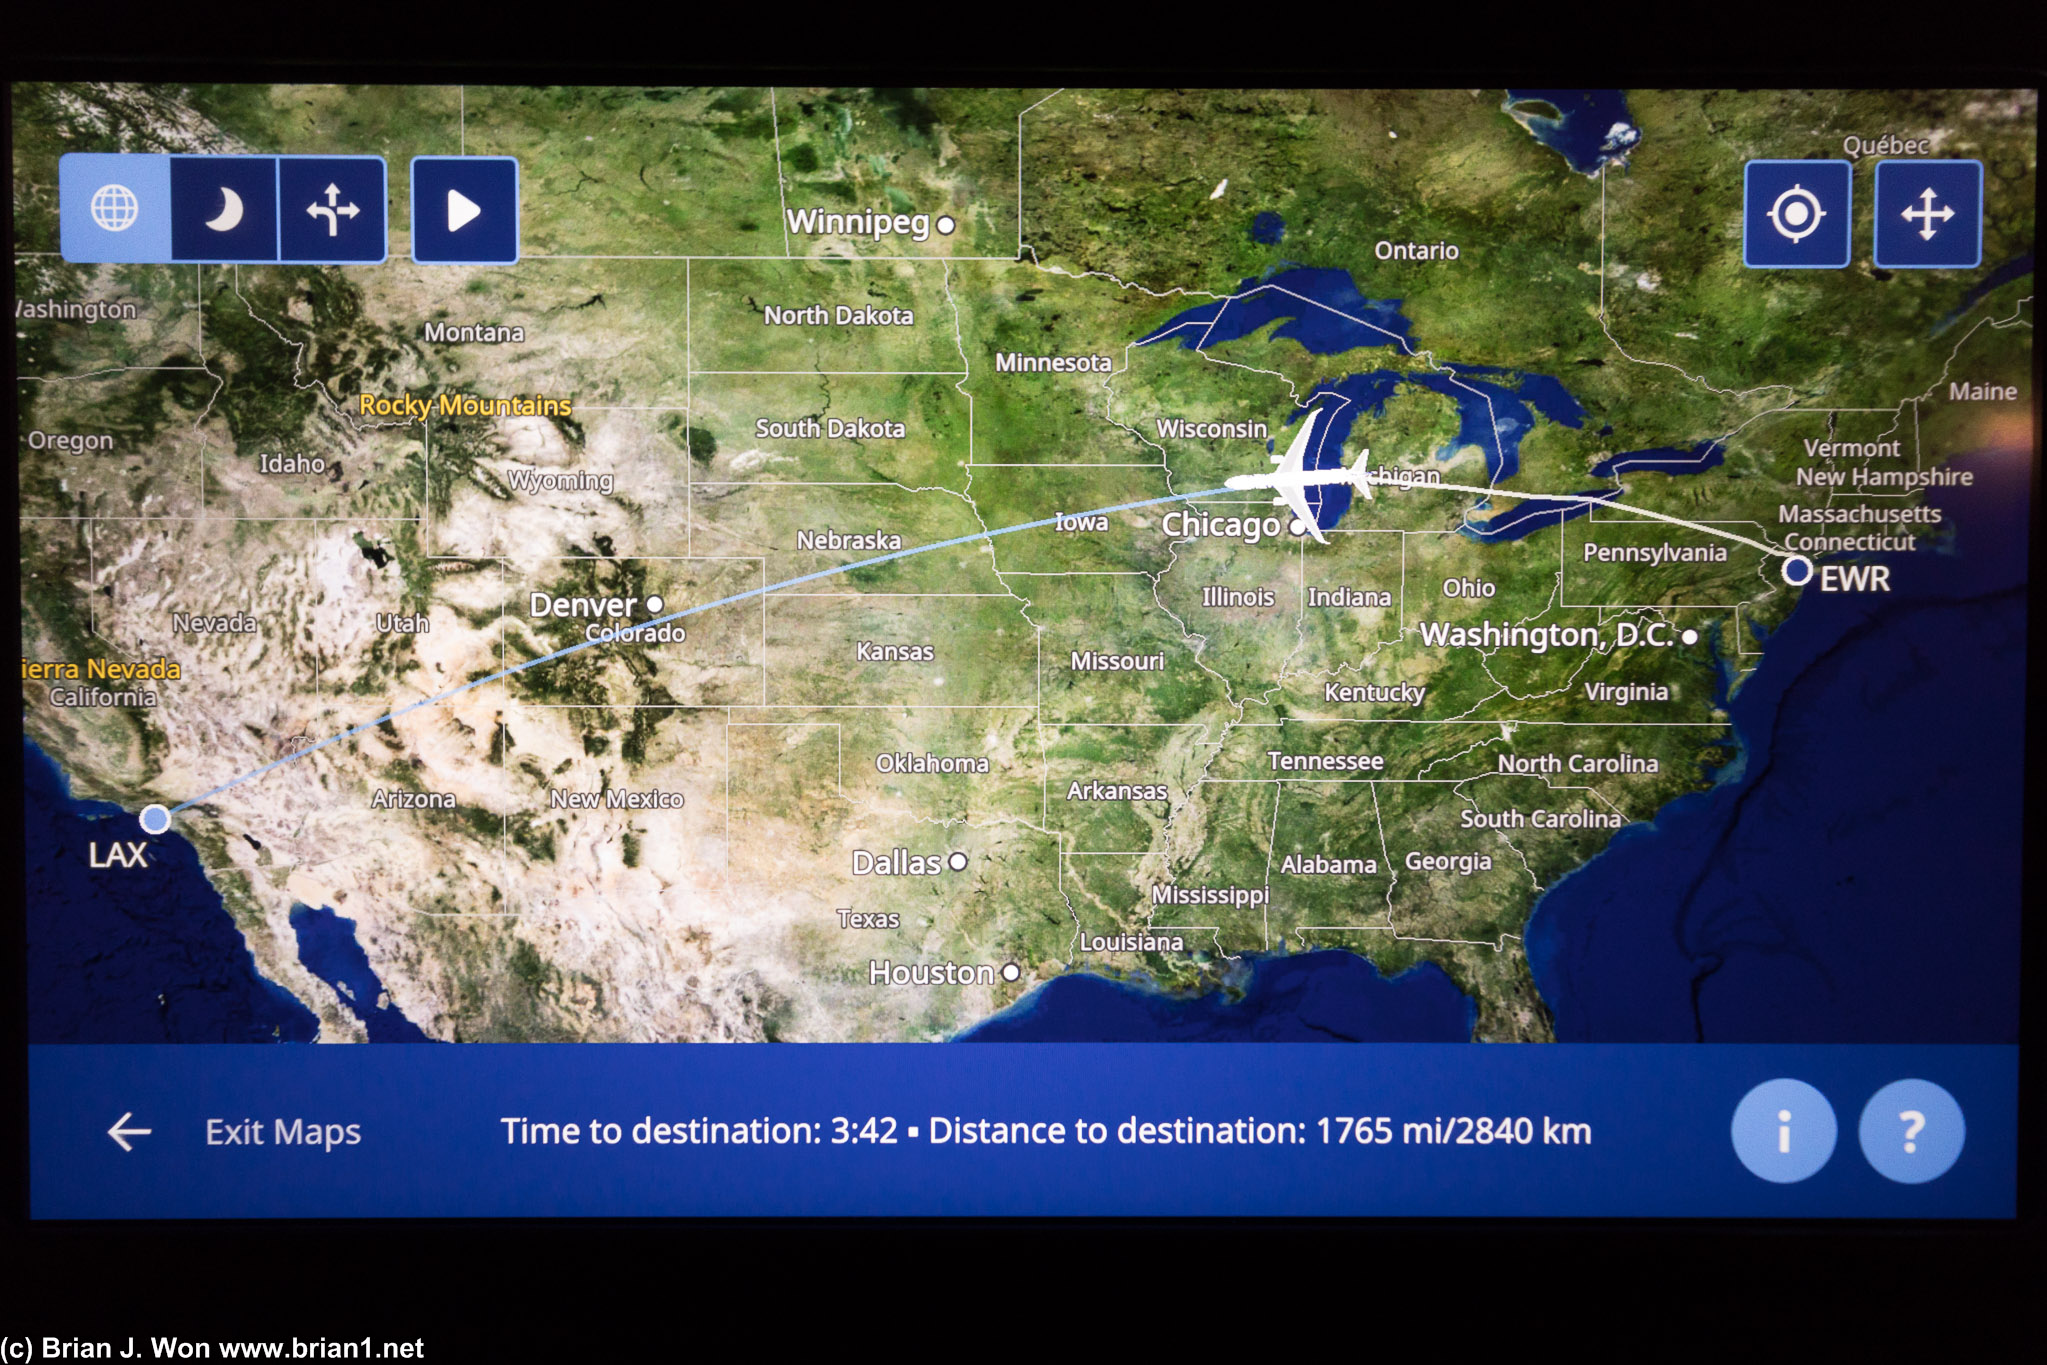 Currently over Chicago. Awesome map.